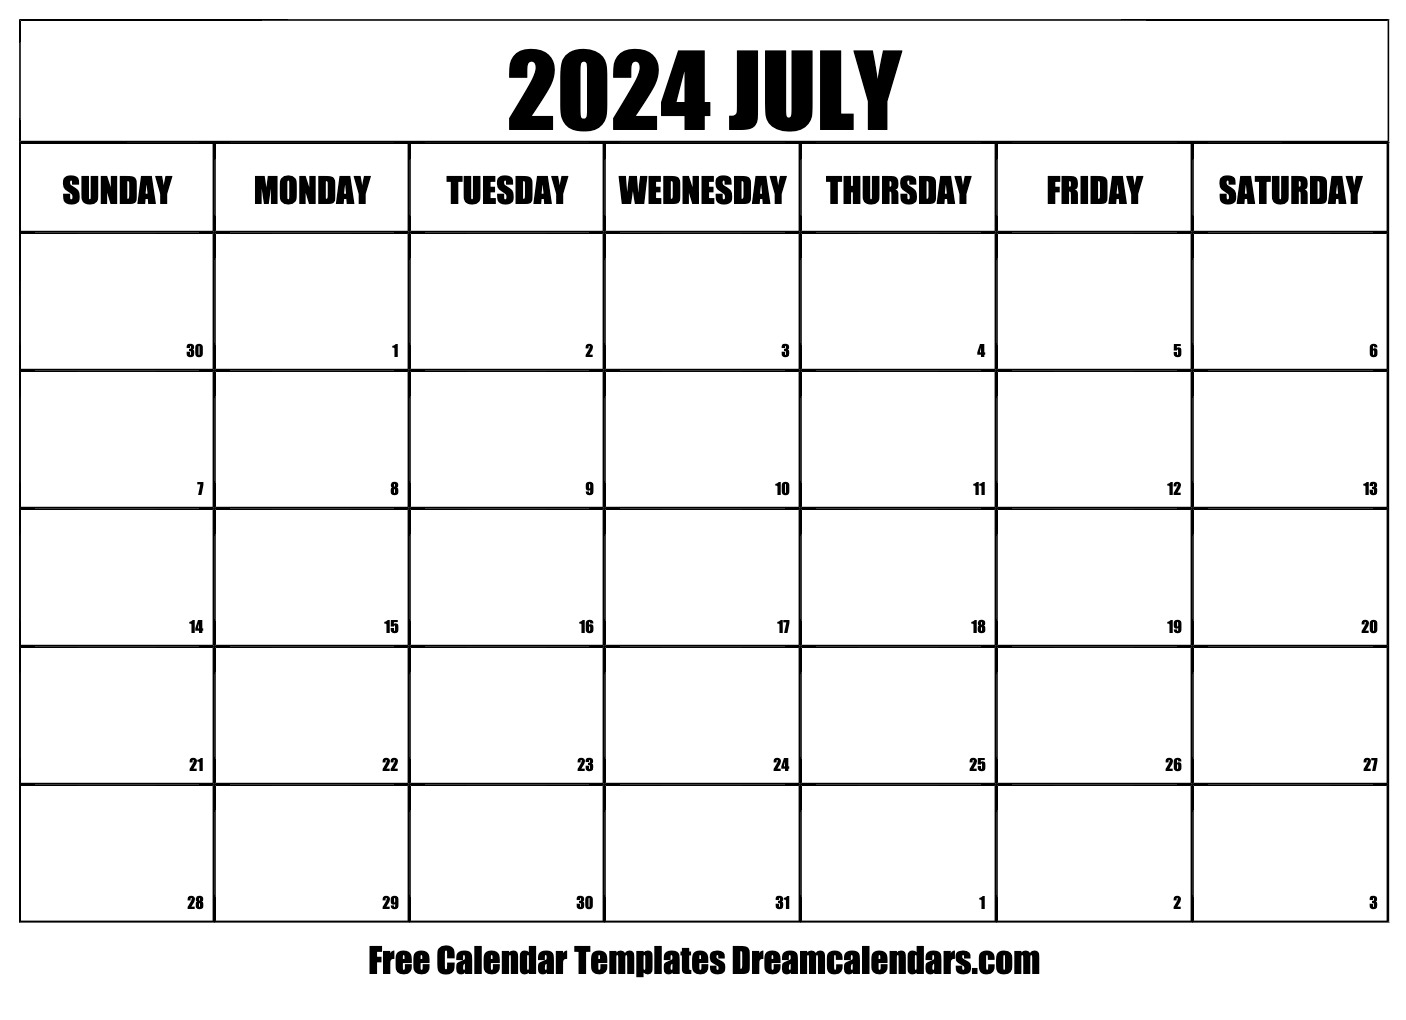 July 2024 Calendar | Free Blank Printable With Holidays for July Calendar 2024 Free Printable